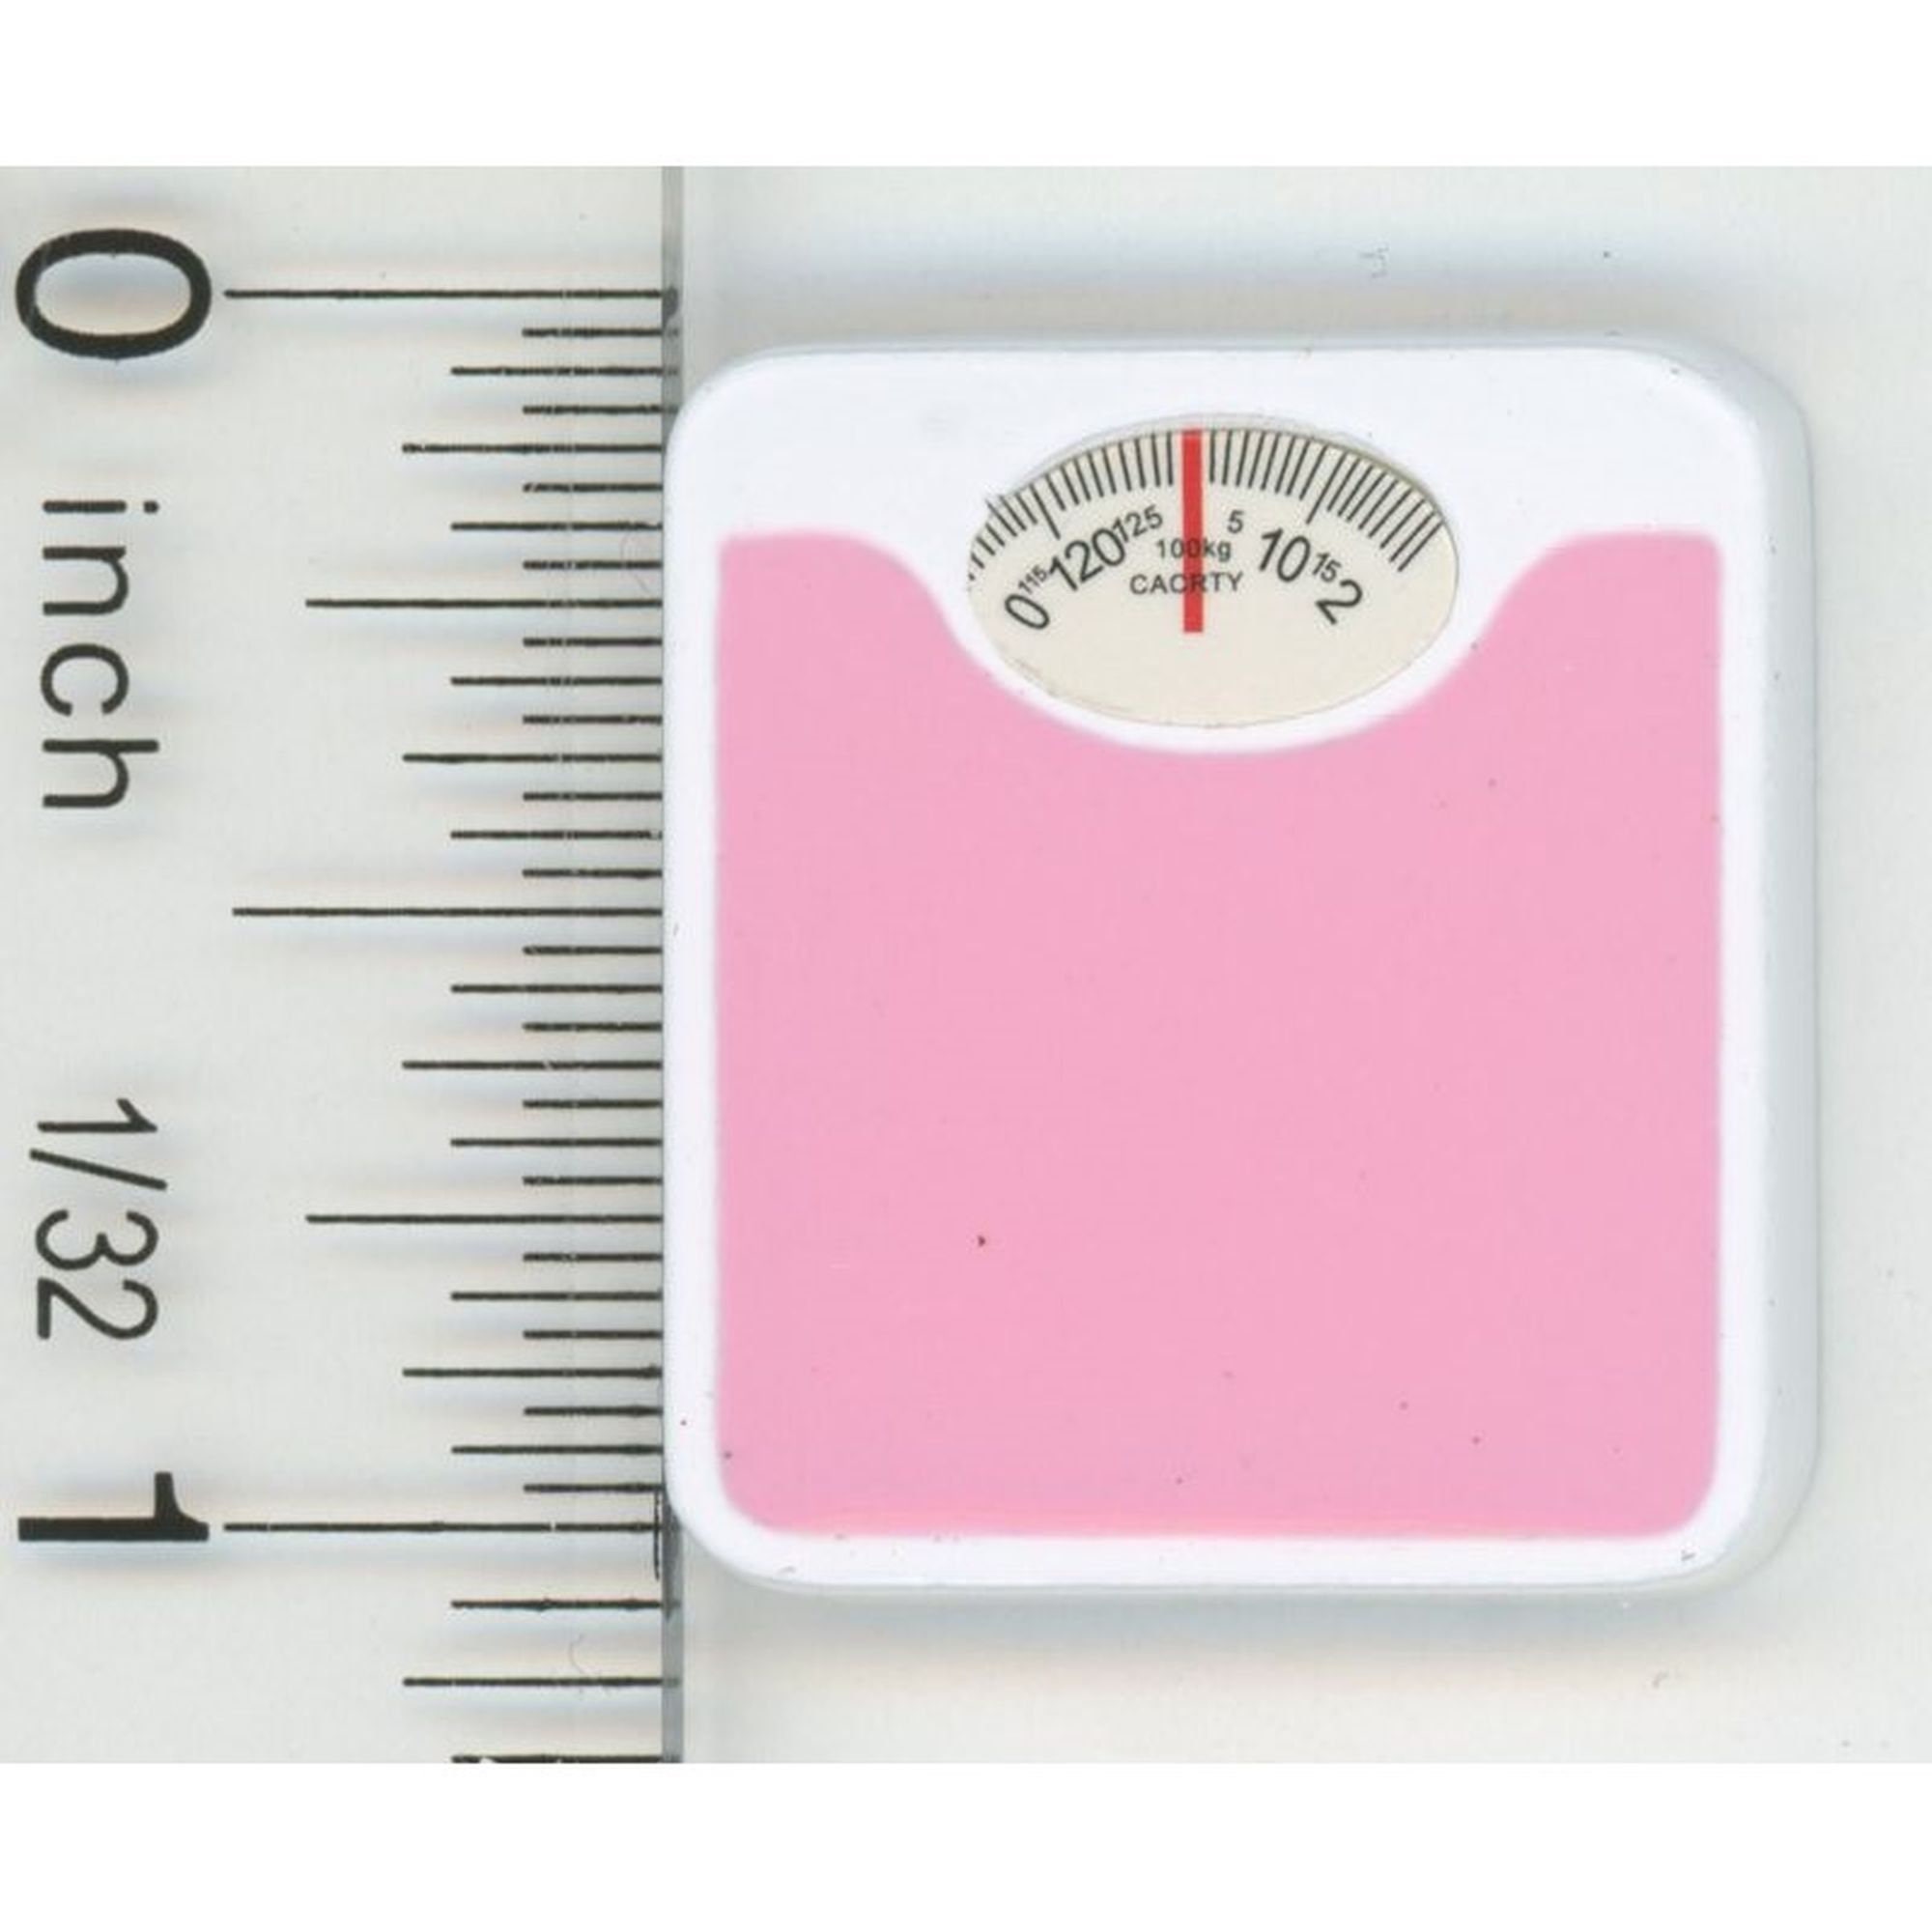 Dollhouse Bathroom Weighing Scale 1:12 Miniature Weight Balance Home Decor Sale 